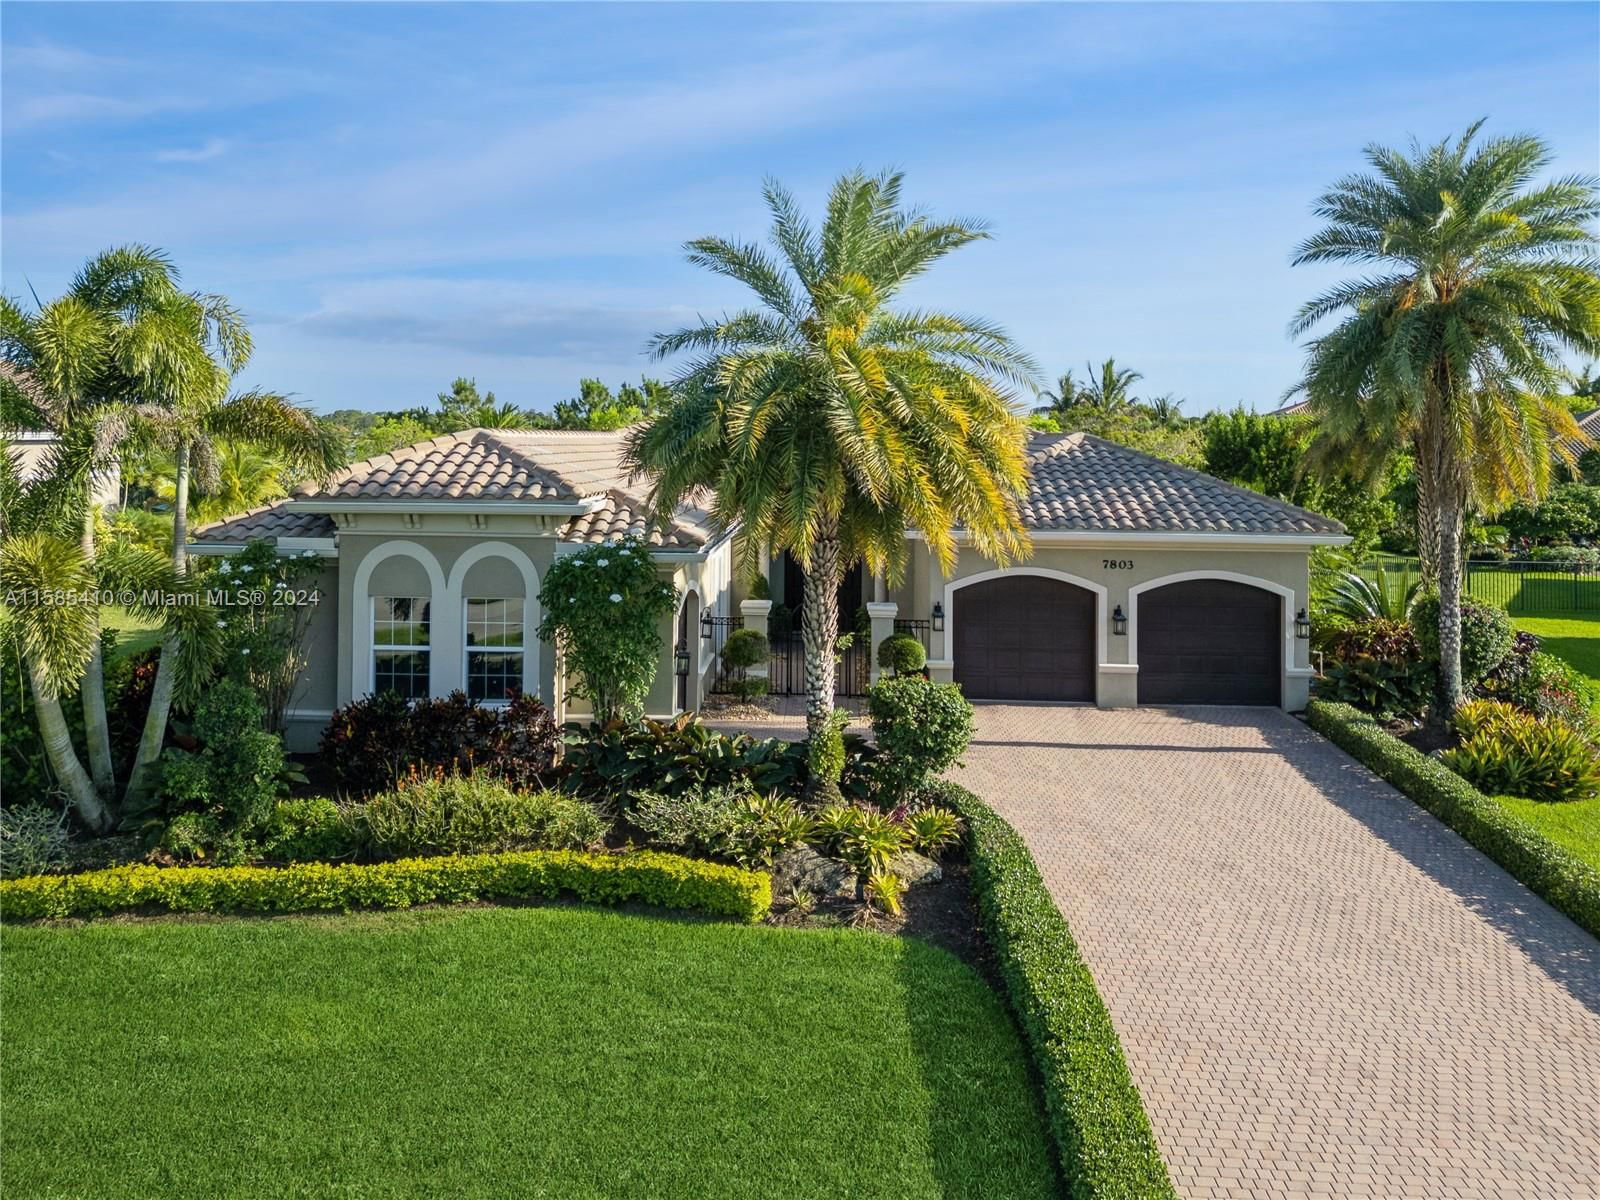 Real estate property located at 7803 Maywood Crest Dr, Palm Beach County, BAY HILL ESTATES, Palm Beach Gardens, FL